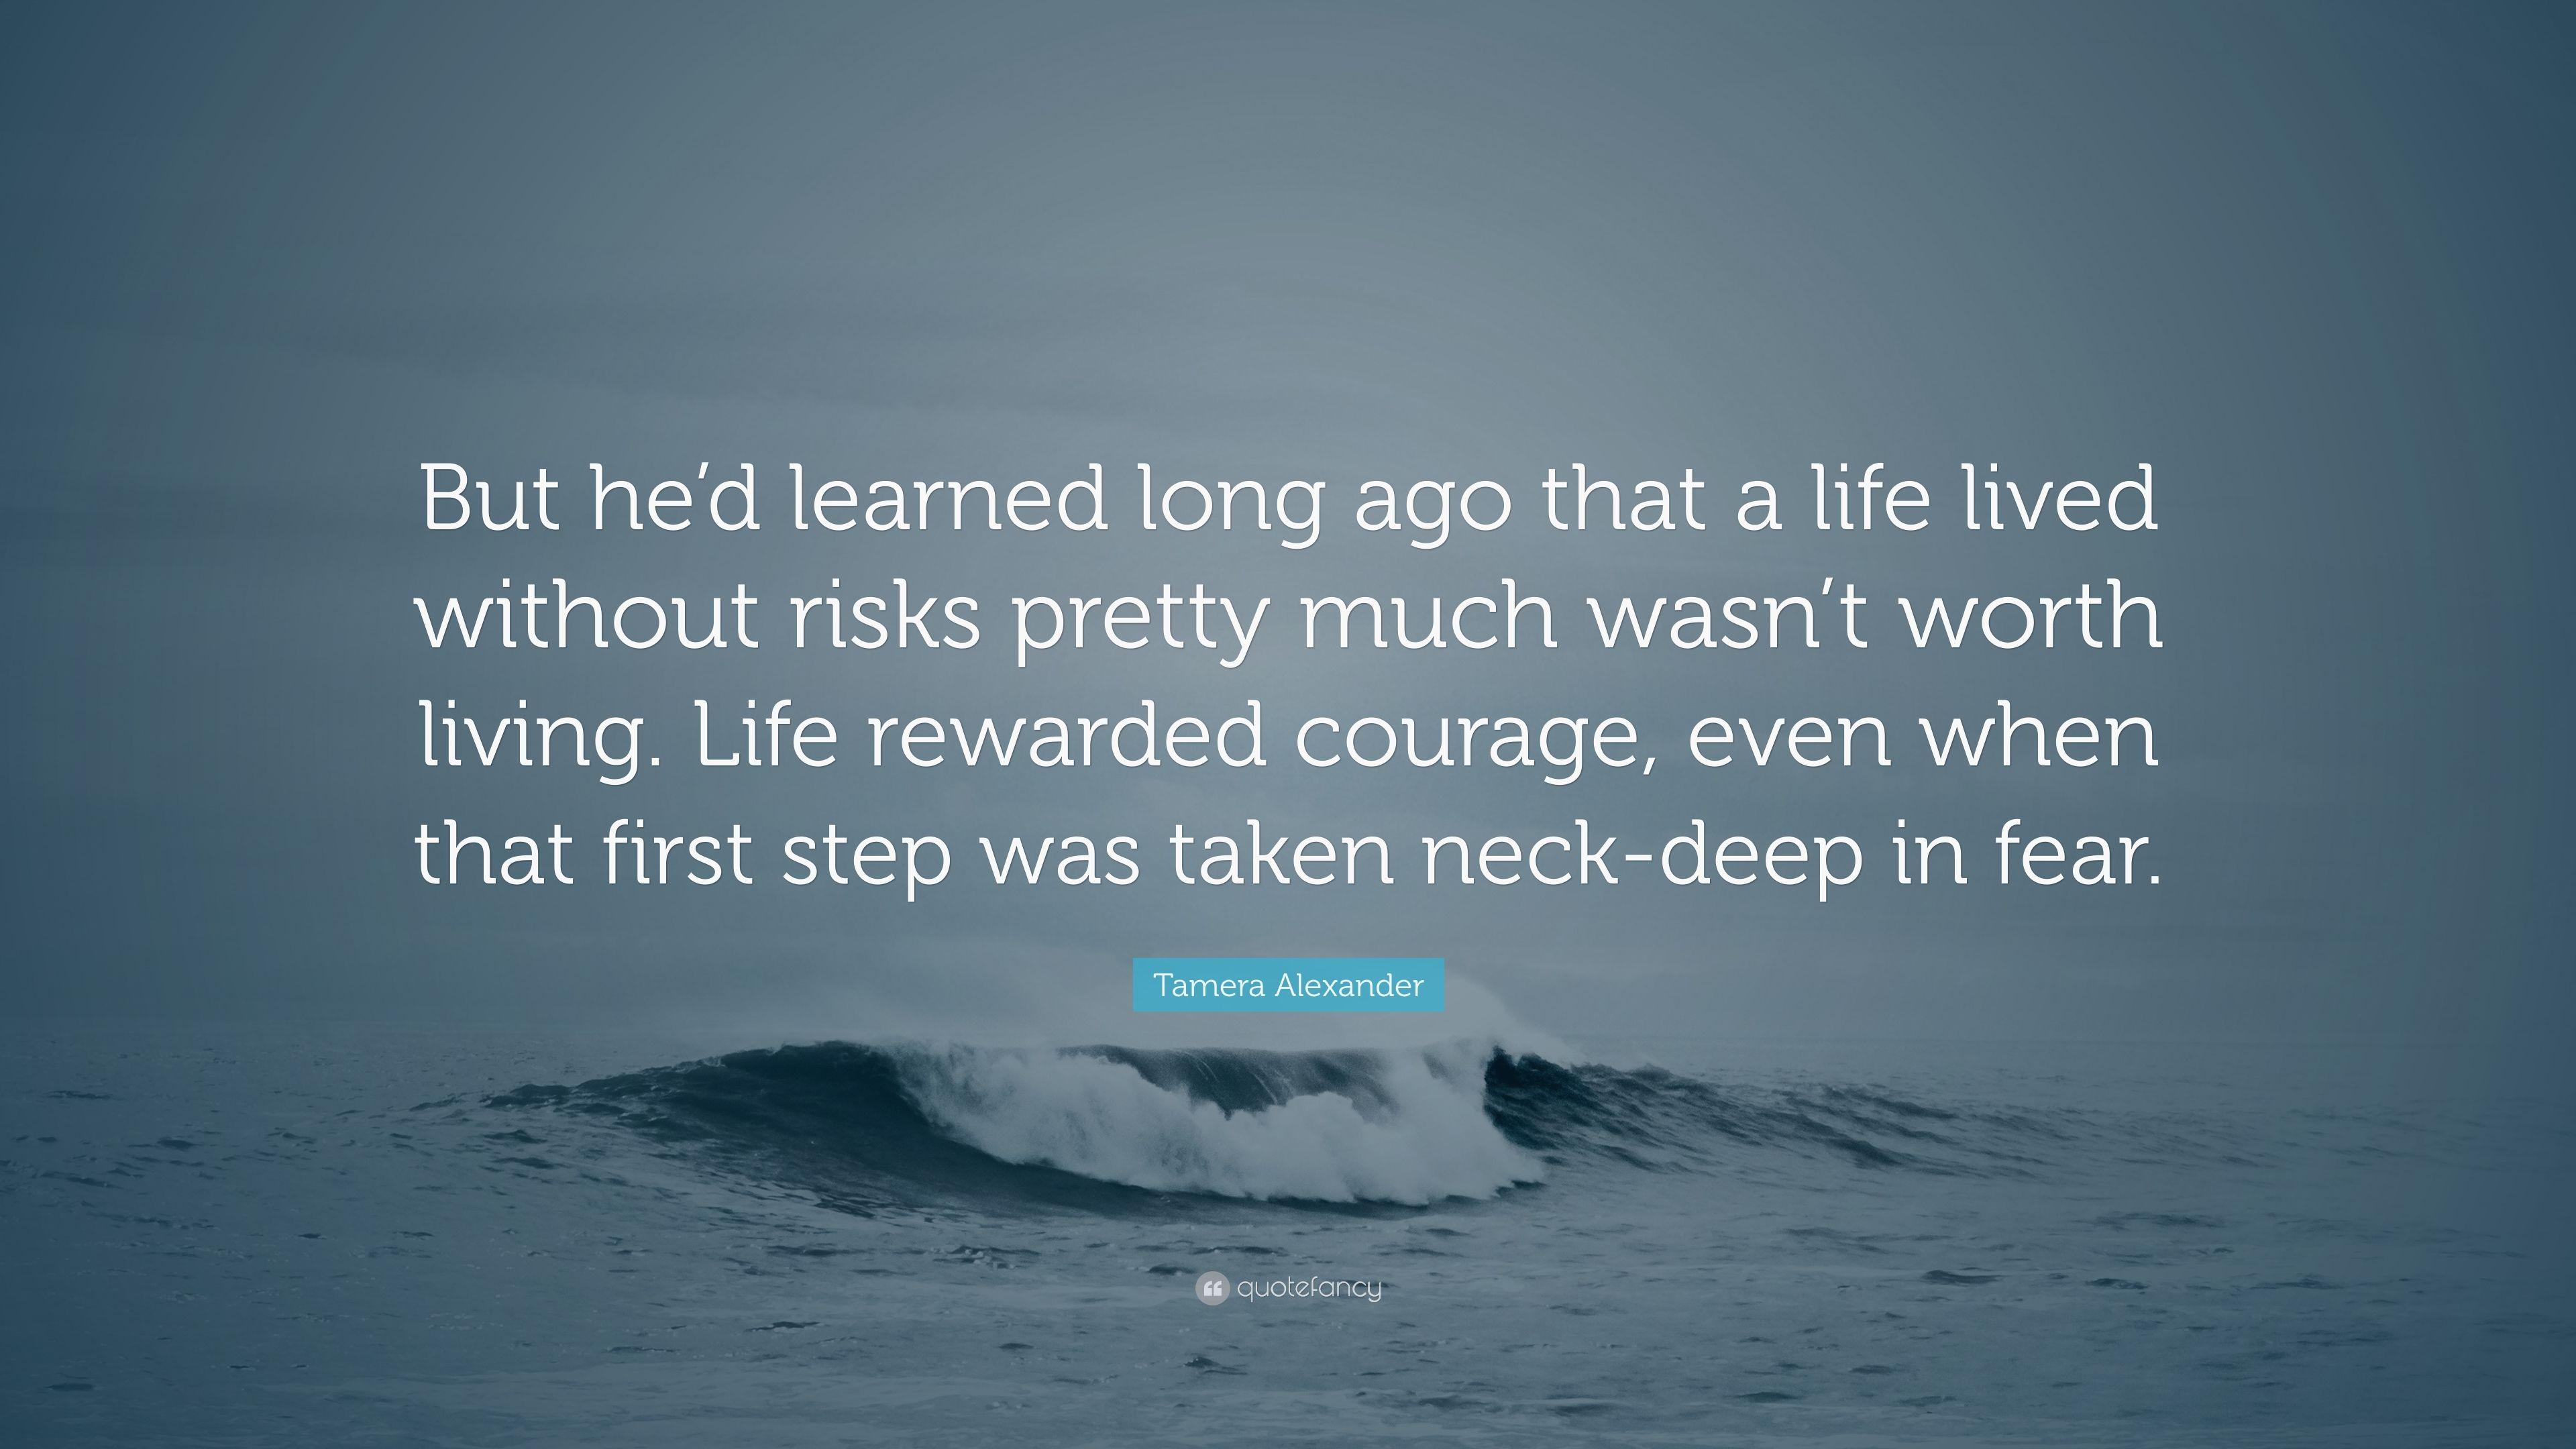 Tamera Alexander Quote: “But he'd learned long ago that a life lived